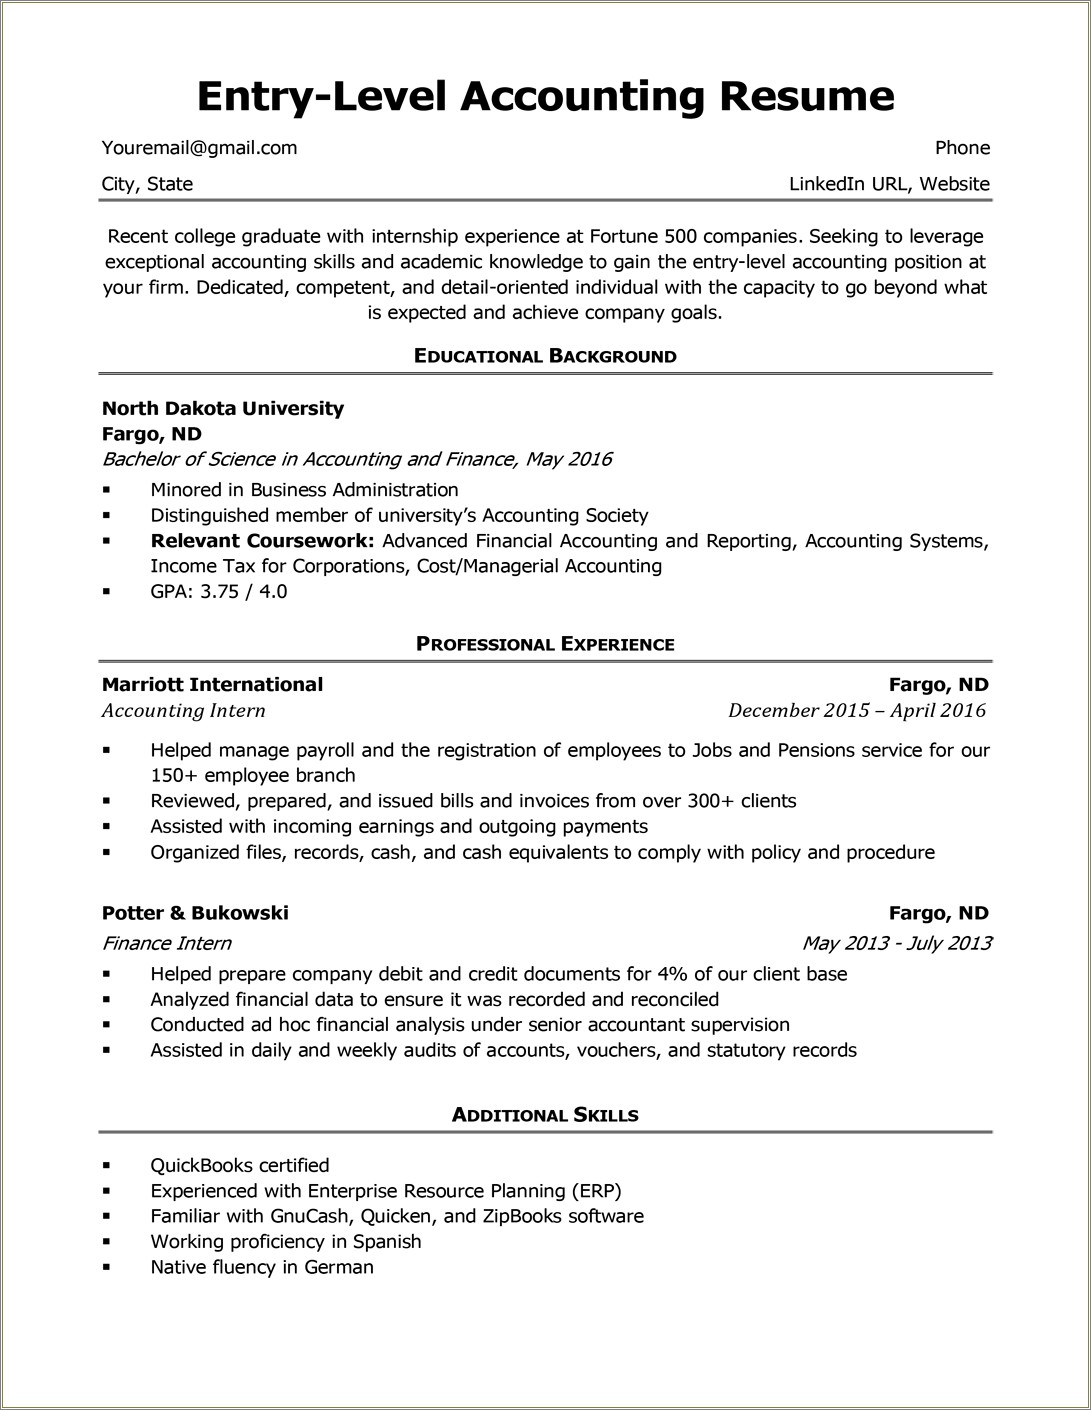 Mba Graduate Resume With Not Muc Work Experience